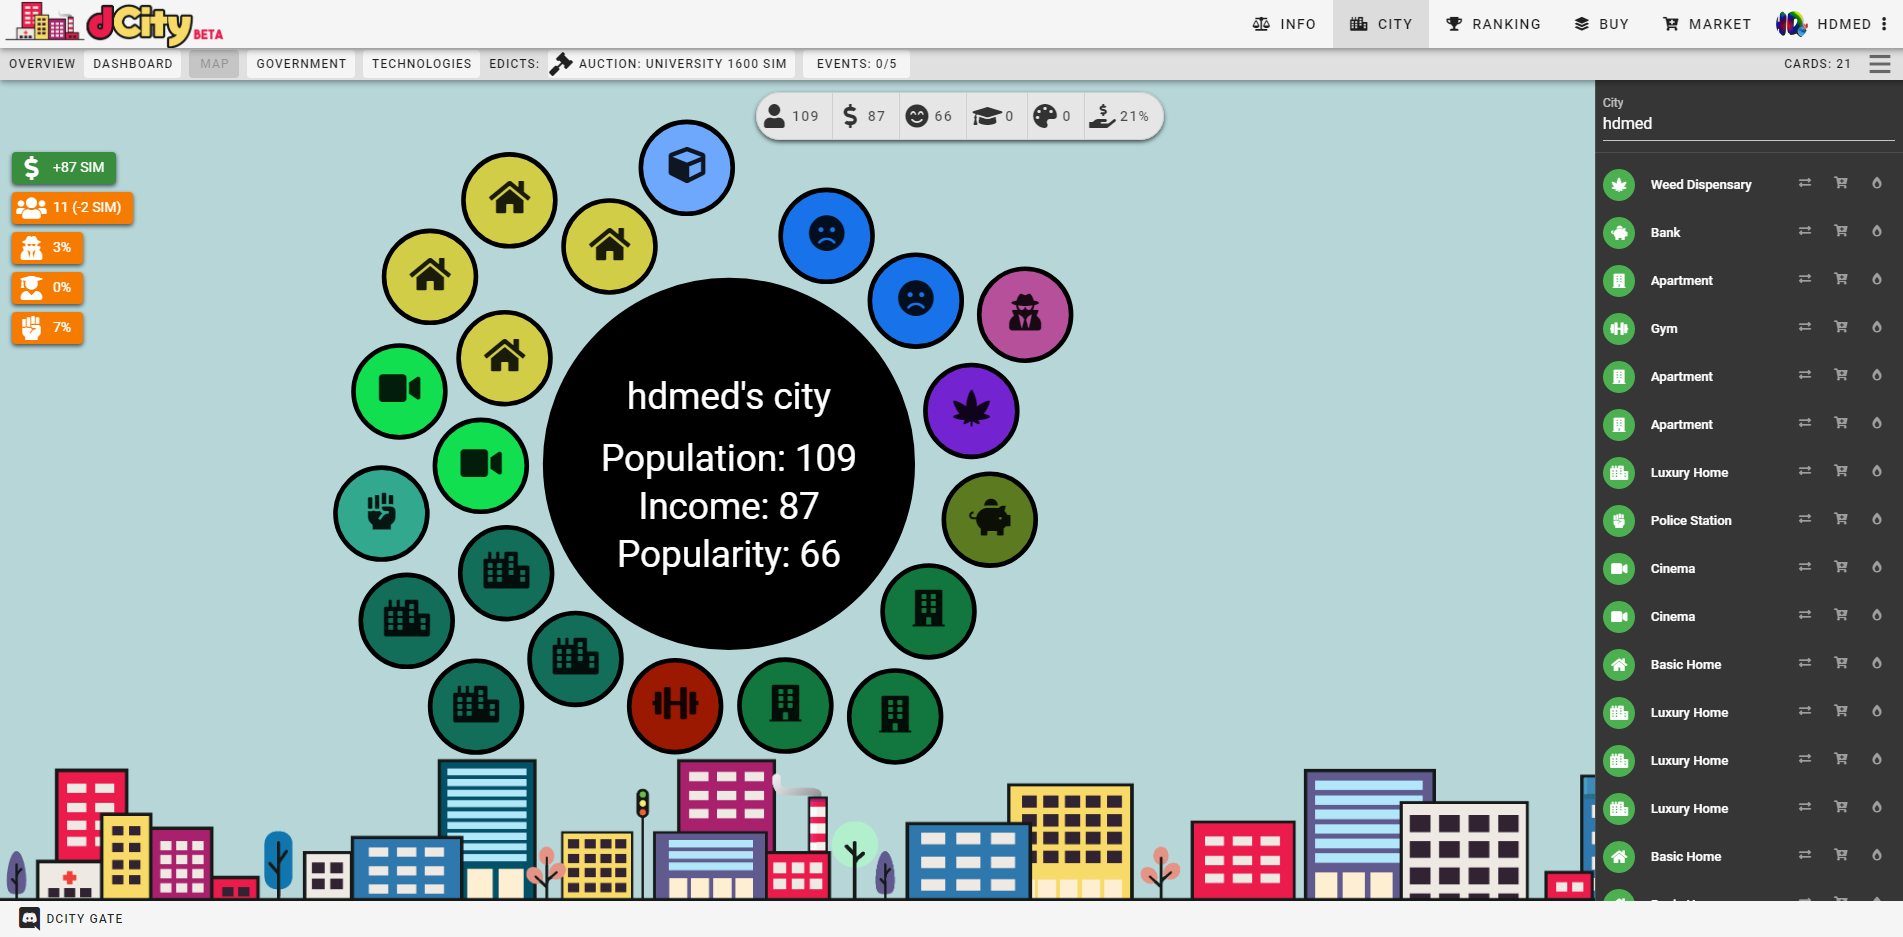 dCITY_io_City (5).png